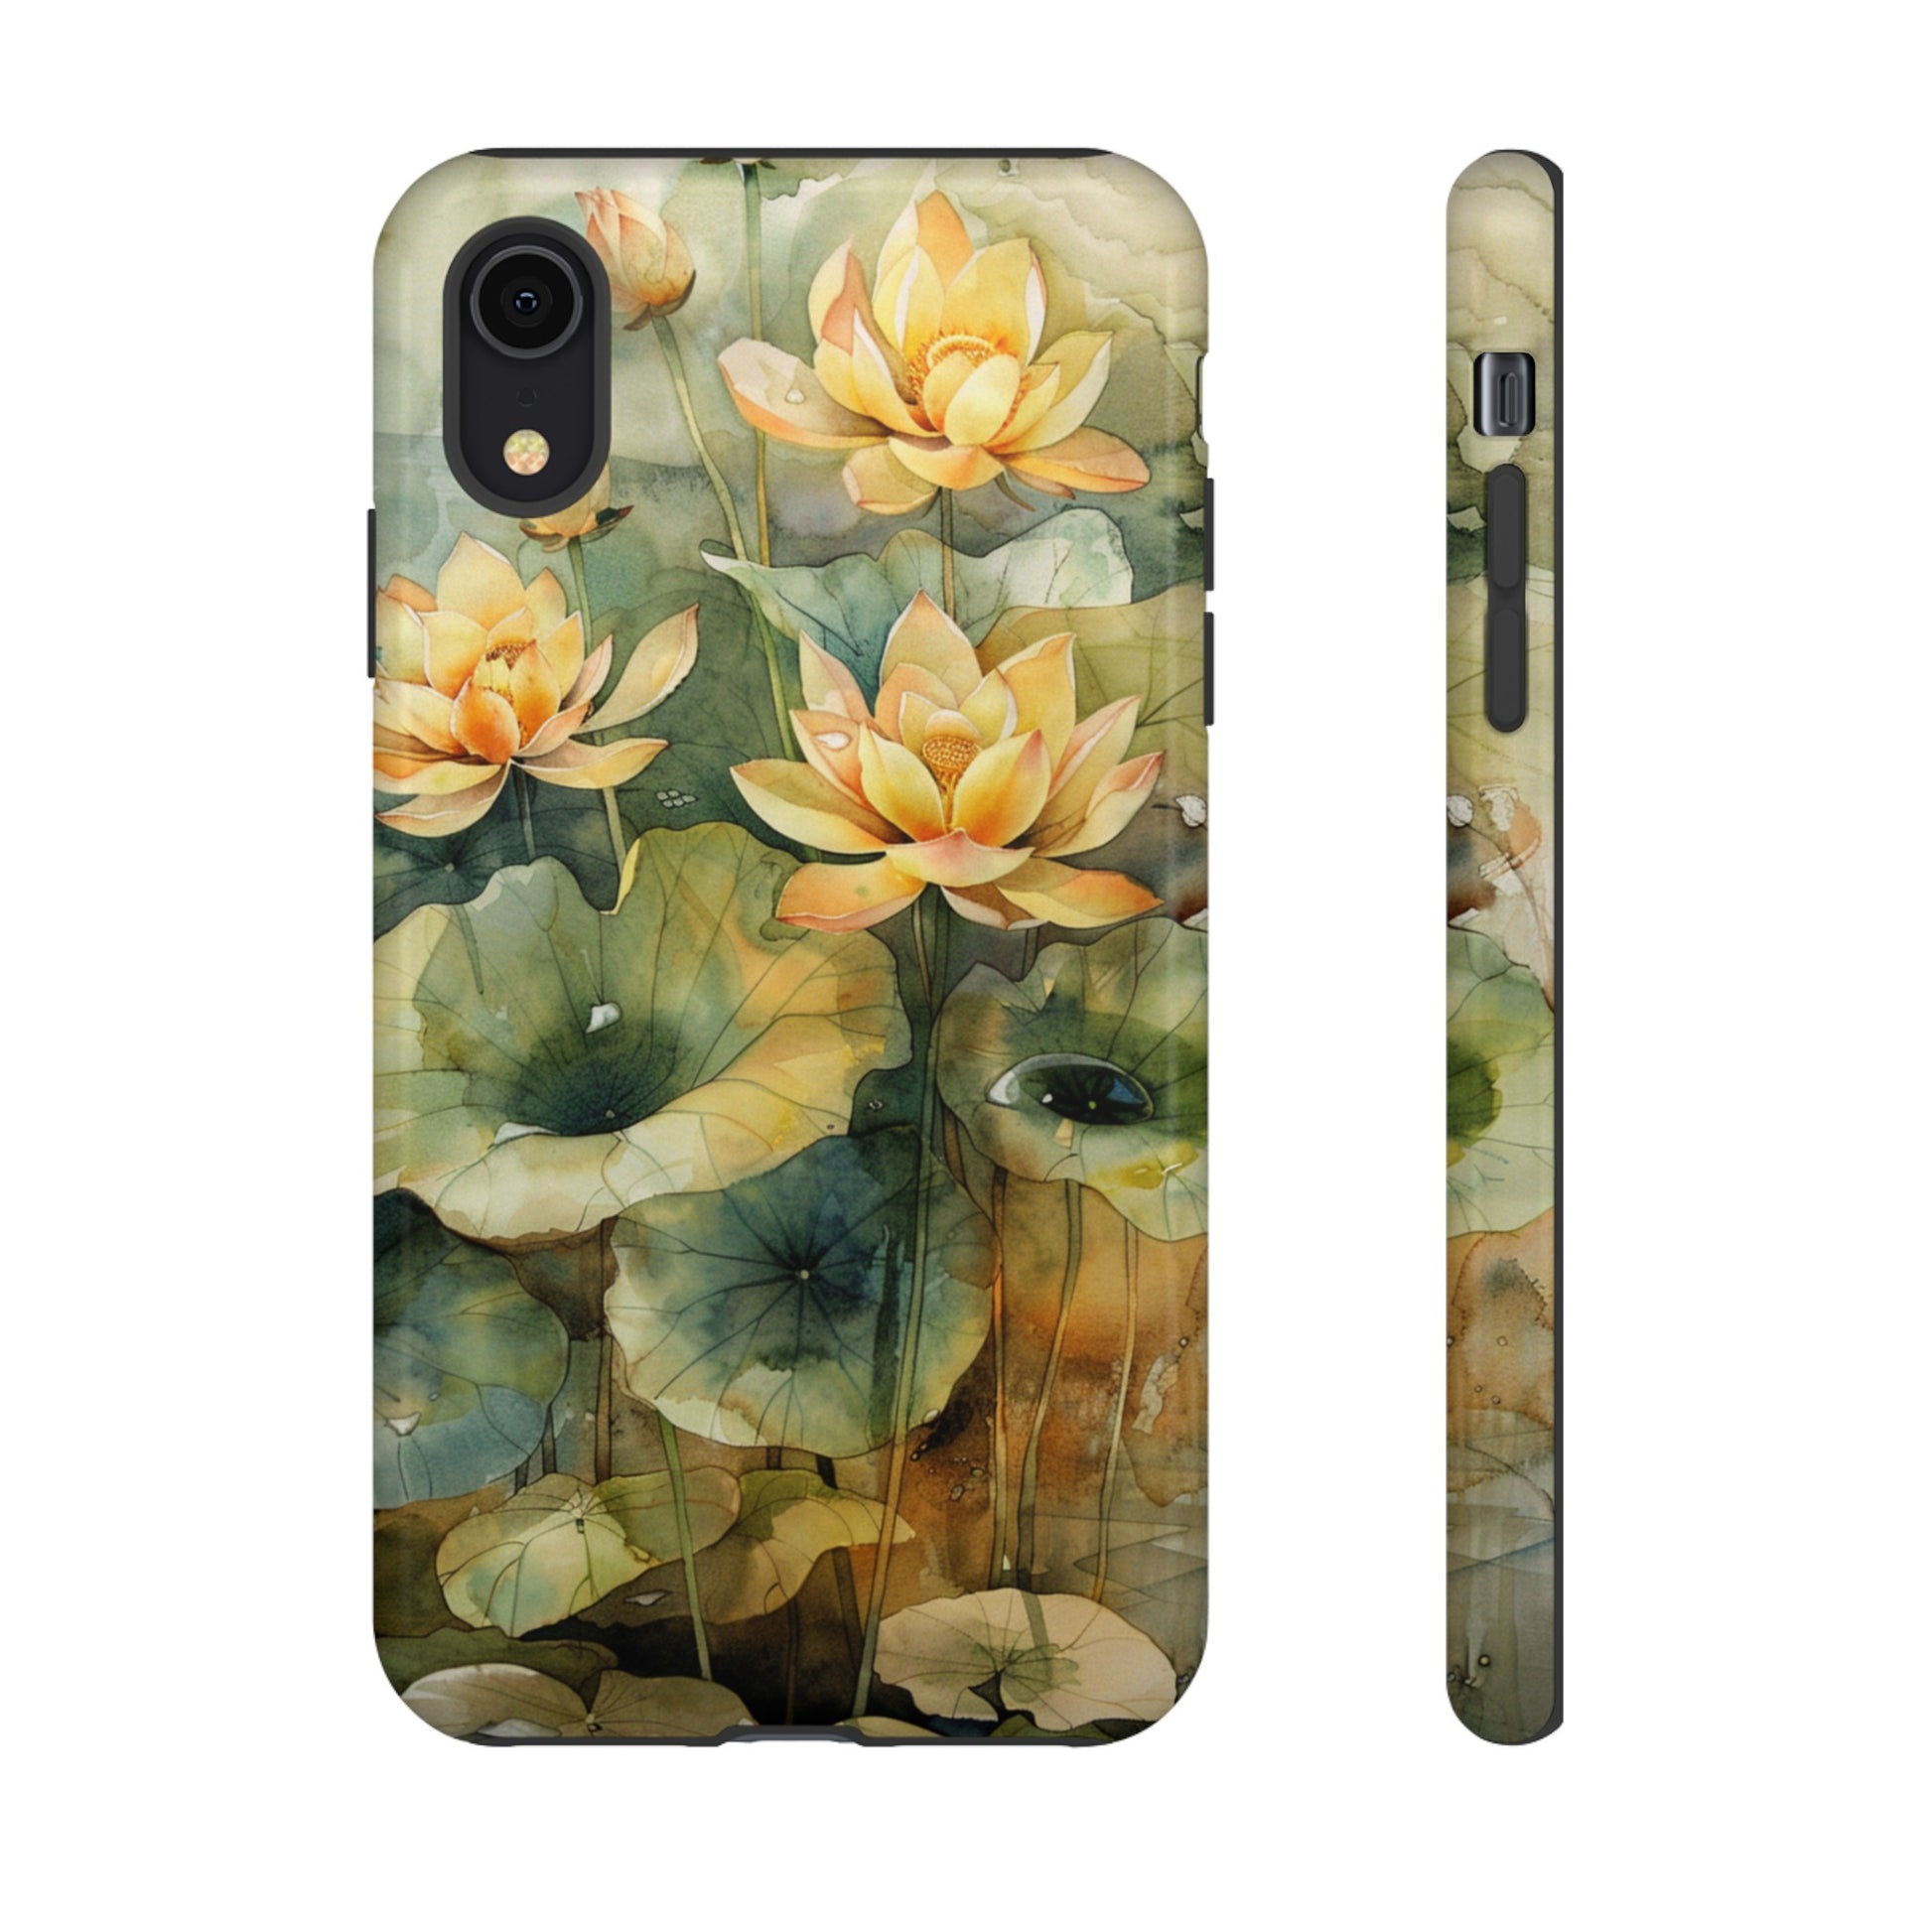 Lotus watercolor phone case for iPhone 11 case